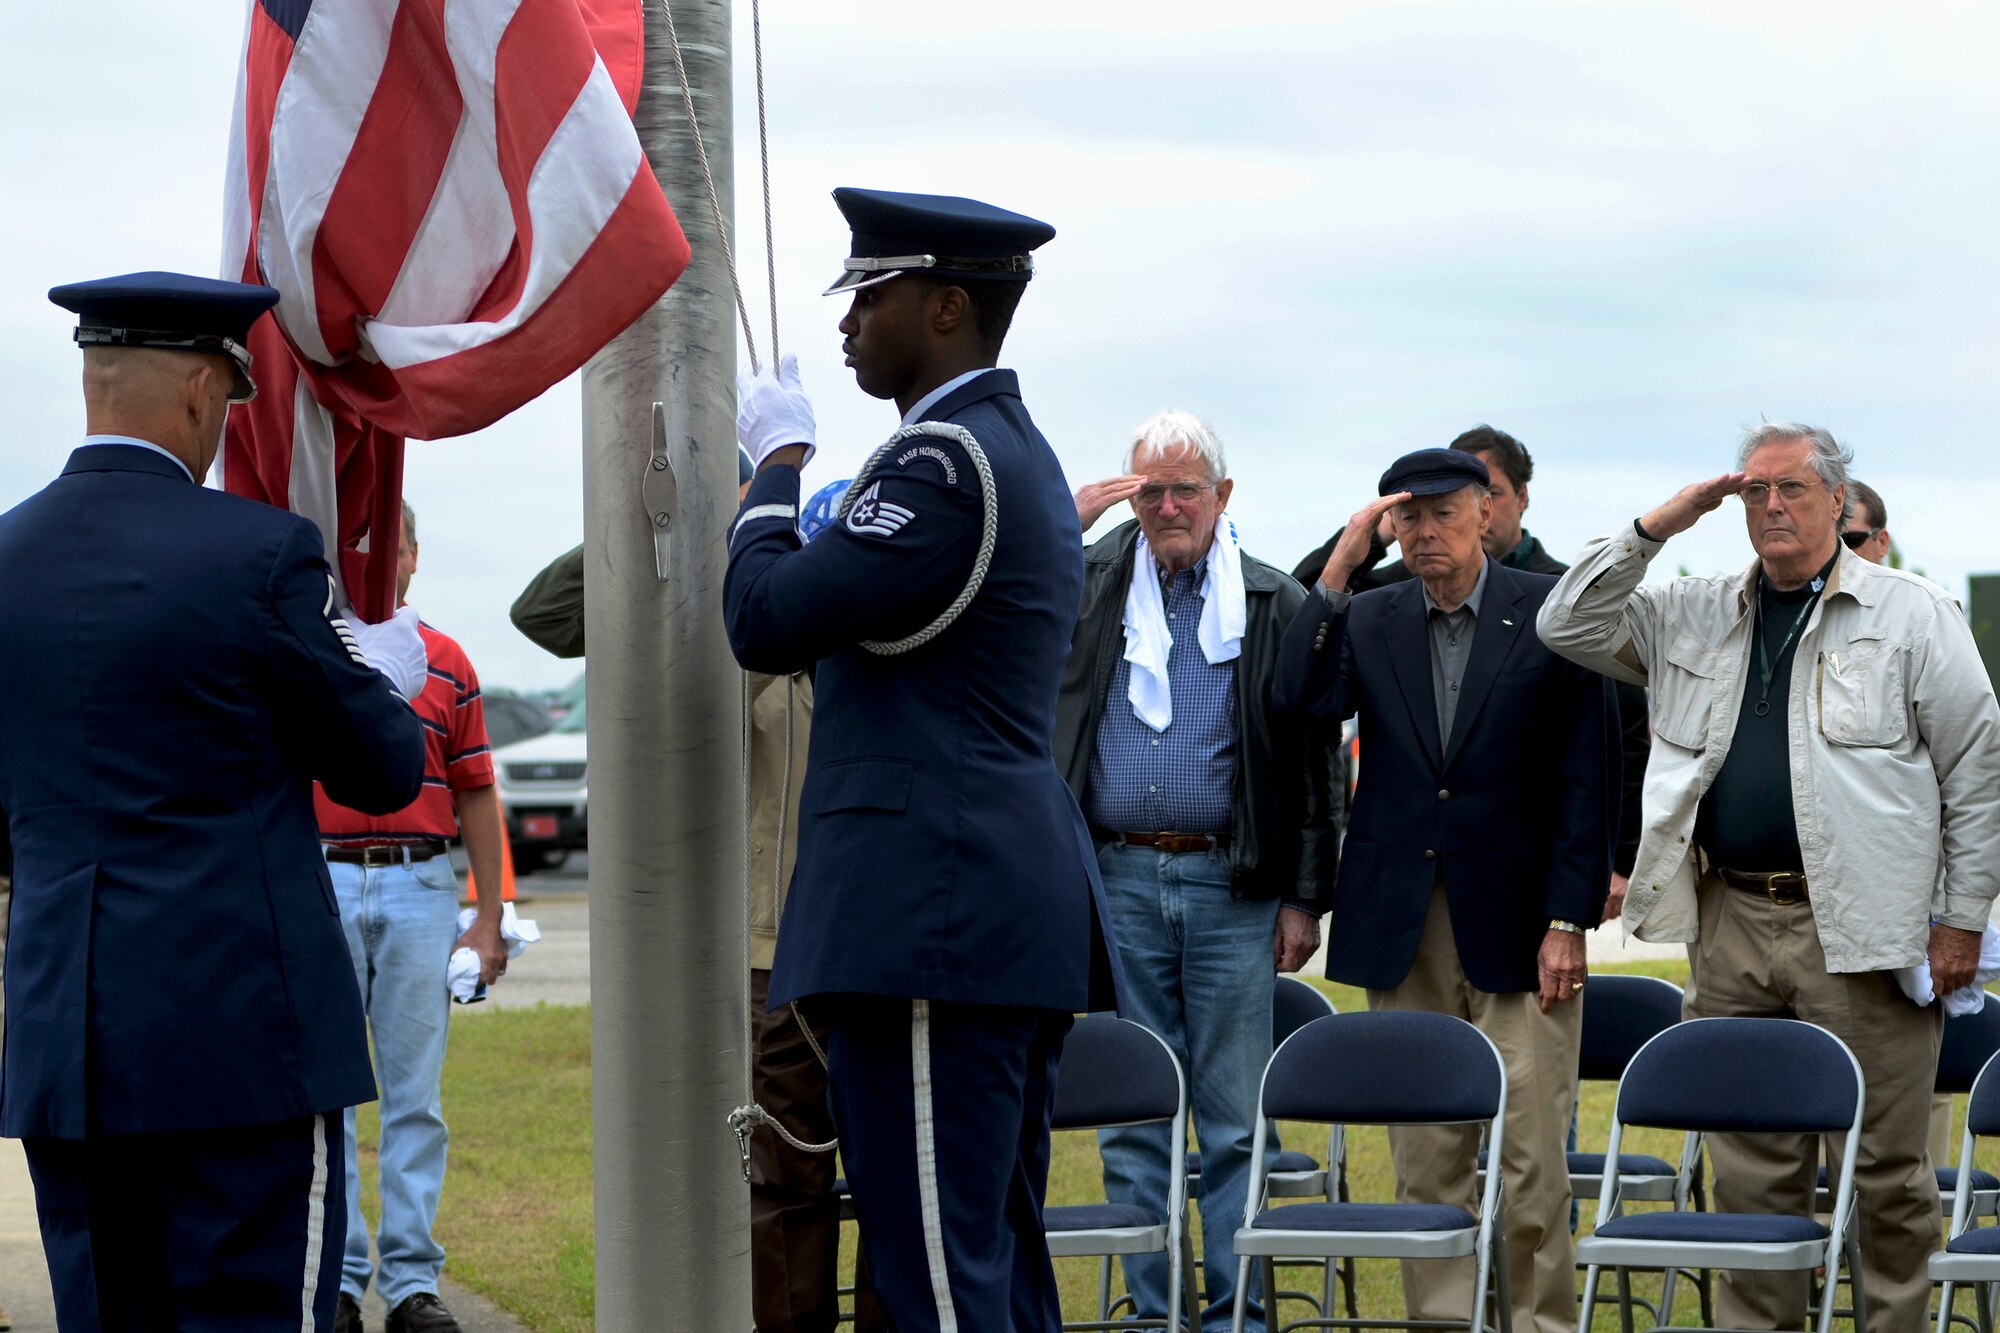 U.S. Air Force retired fighter pilots from the South Carolina Air National Guard, salute the U.S. flag as it is raised during a pilot reunion ceremony at McEntire Joint National Guard Base, Eastover, S.C., May 4, 2013. Multi-generation SCANG pilots dating back from the P-51 propeller fighter era to present converged to honor fallen comrades and celebrate their experiences and contributions to fighter operations and the legacy of the SCANG Swamp Foxes.  (U.S. Air National Guard photo by Tech. Sgt. Caycee Watson/Released)